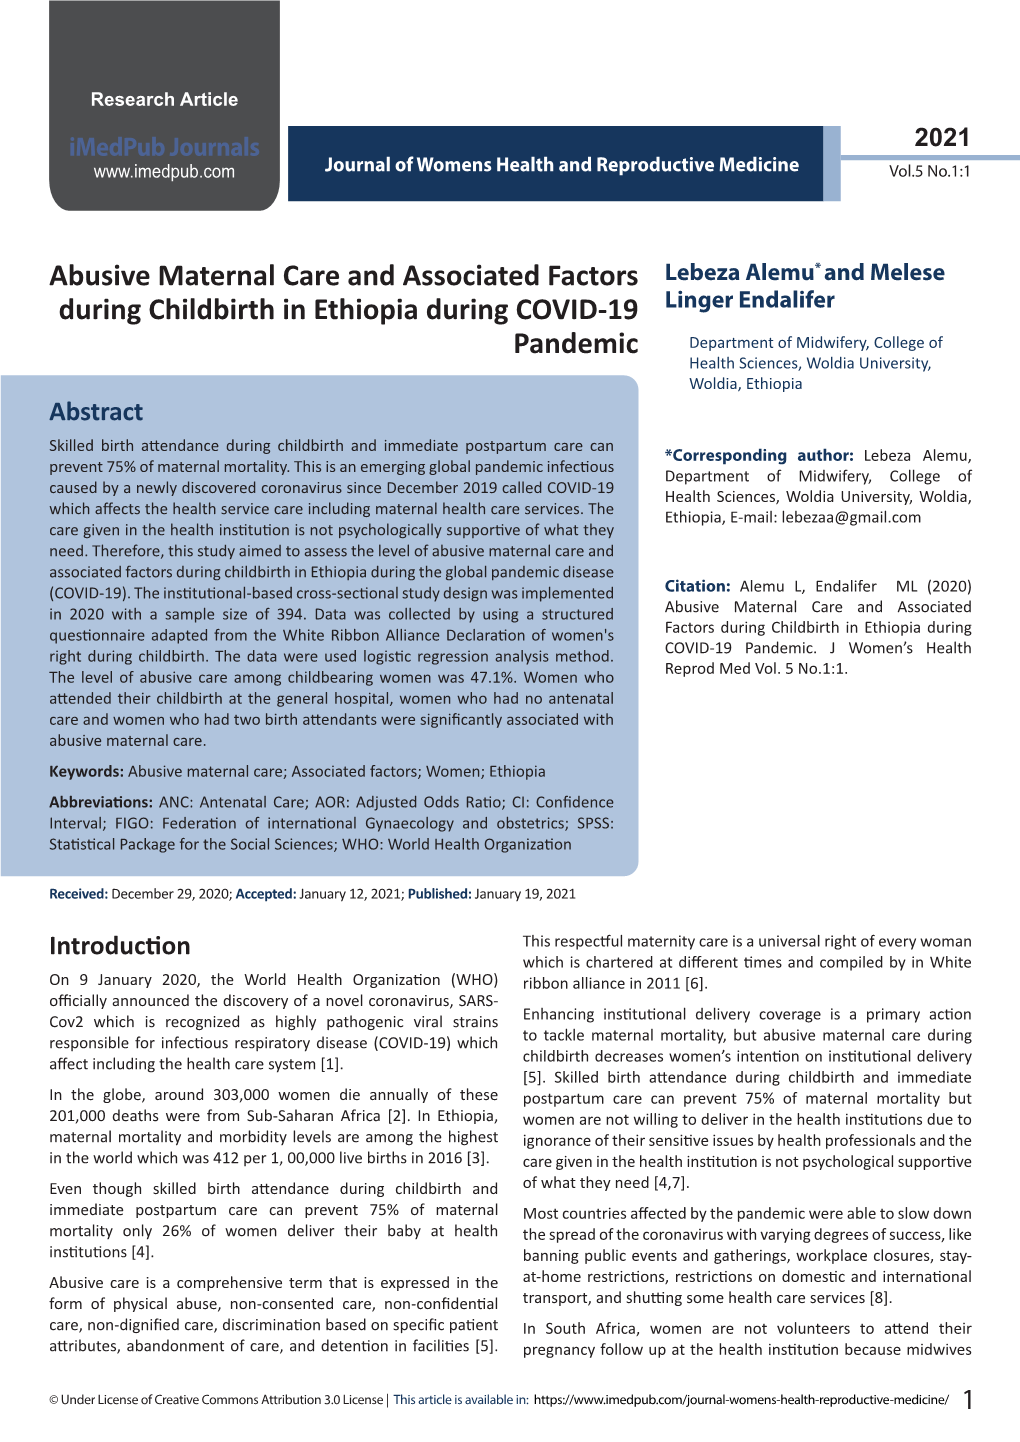 Abusive Maternal Care and Associated Factors During Childbirth in Ethiopia During the Global Pandemic Disease (COVID-19)